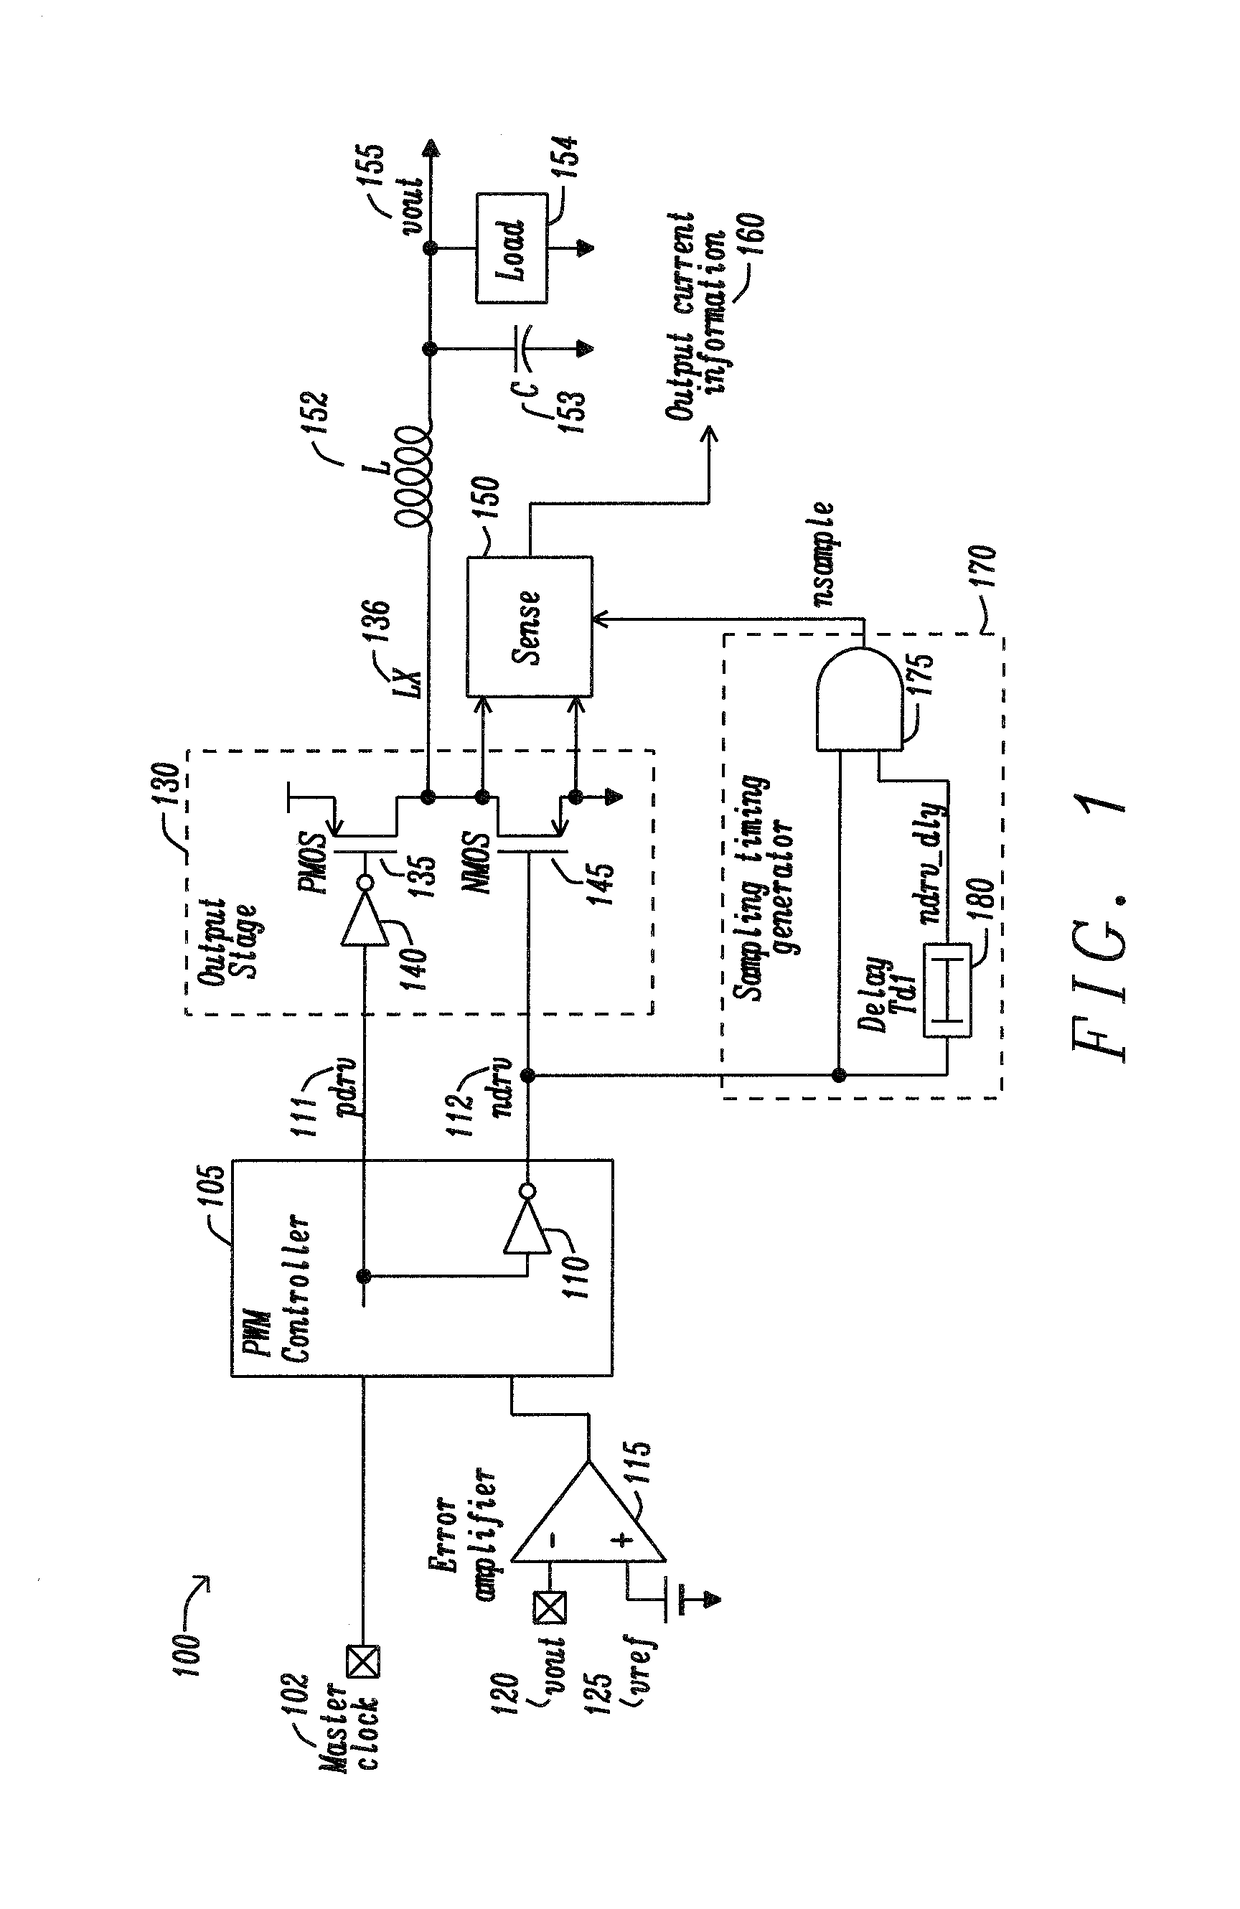 Output current monitor circuit for switching regulator